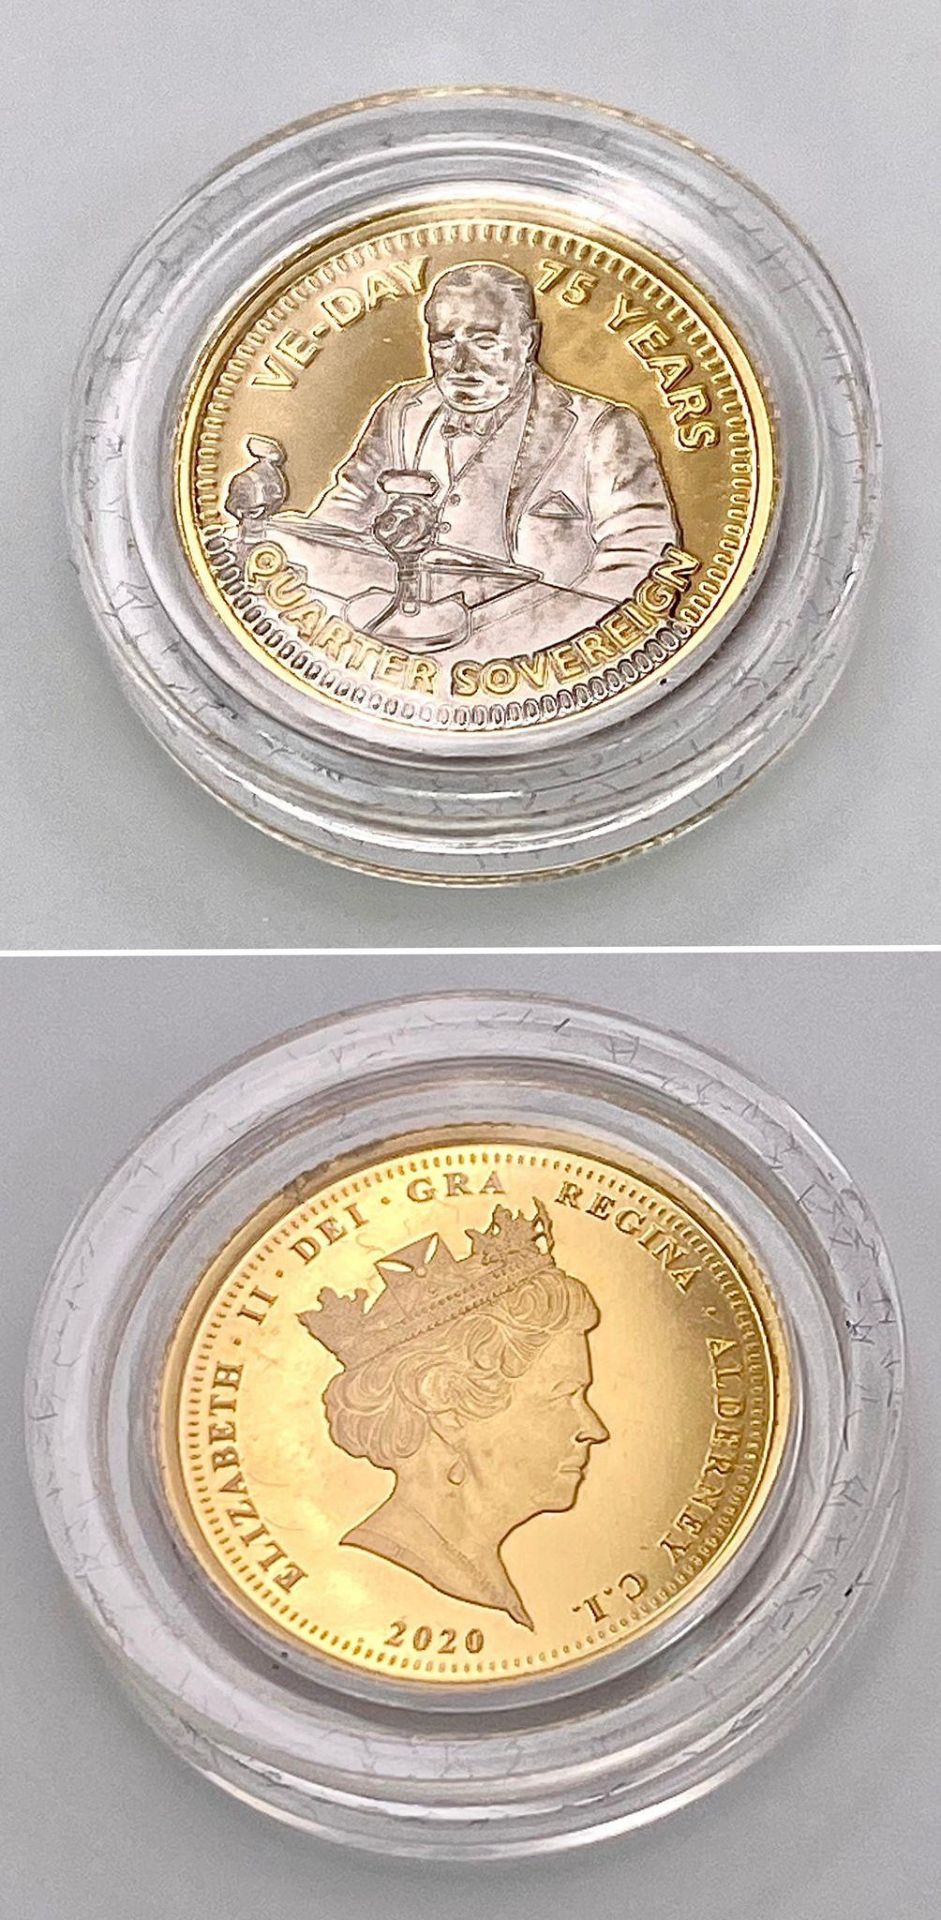 A 22k Gold Quarter Sovereign Commemorating VE Day. Comes with a COA.